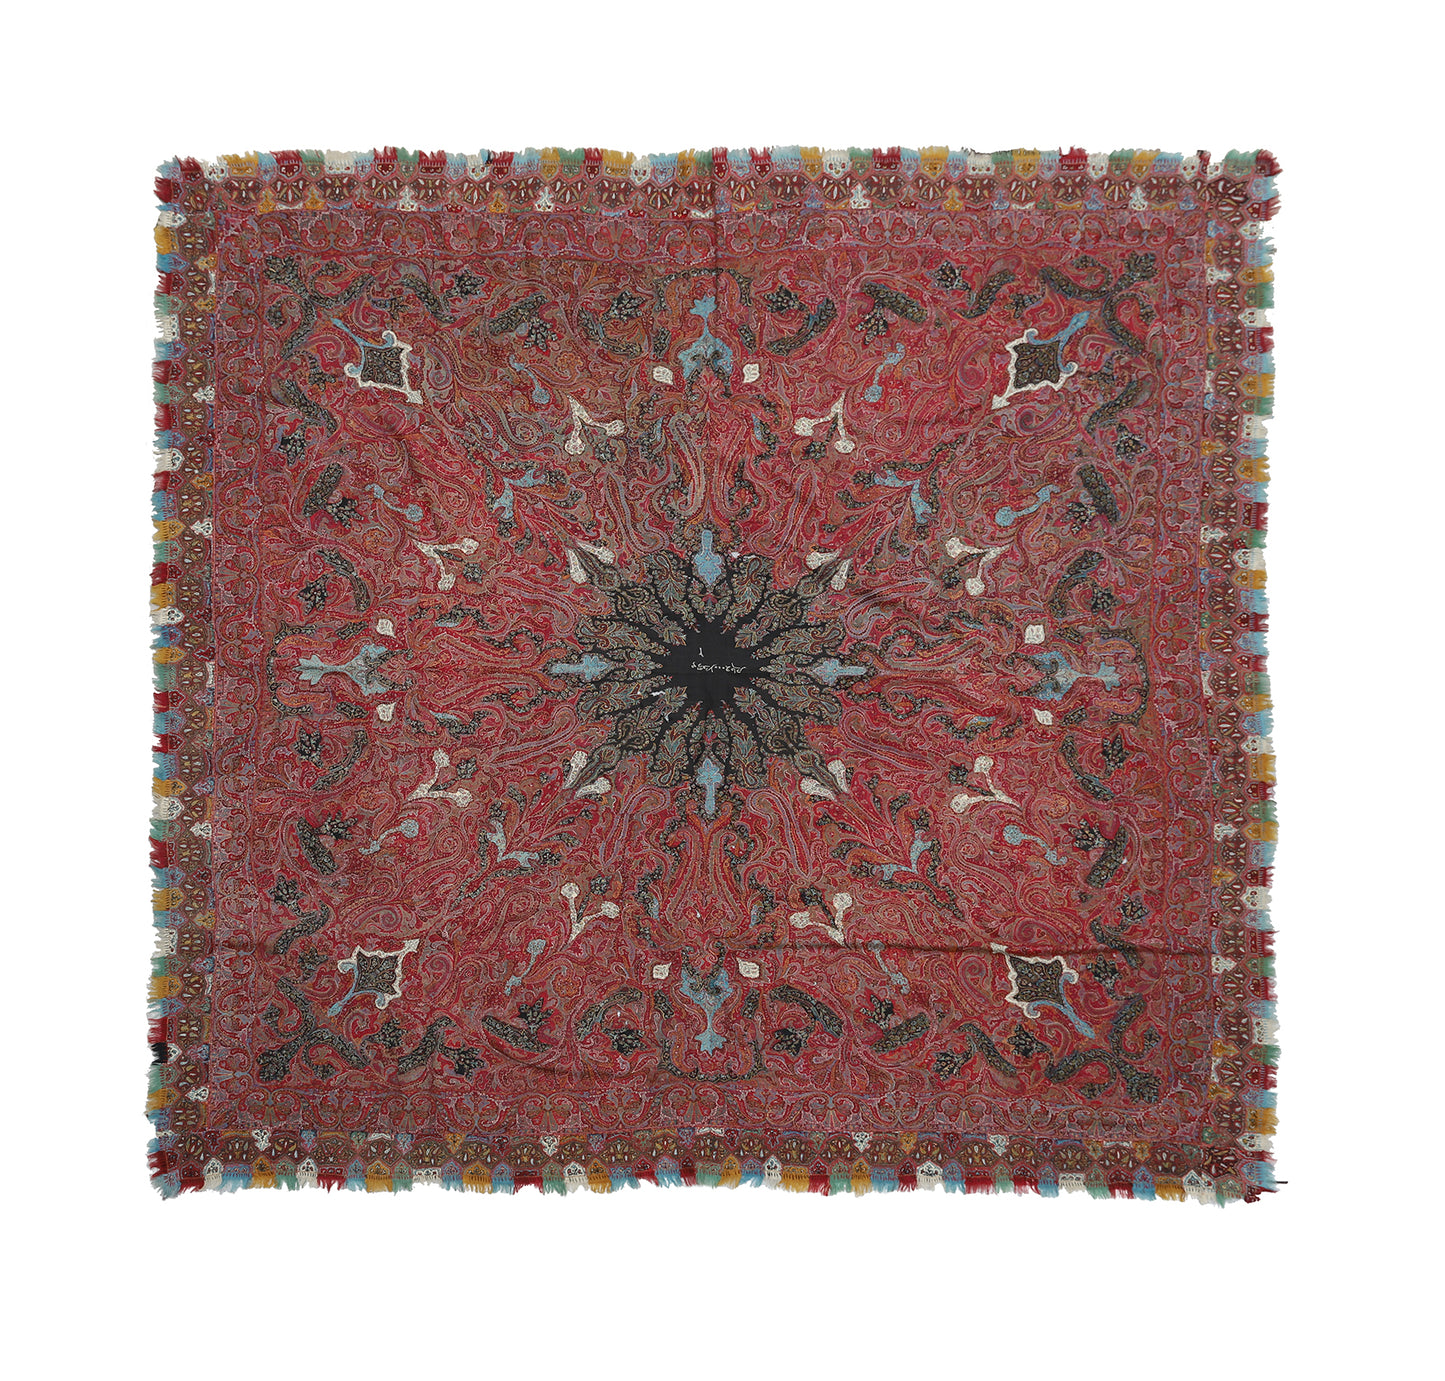 6'x6' Antique Large Kashmiri Shawl, India, 2nd Half 19th Century With Handstitched Label In The Center